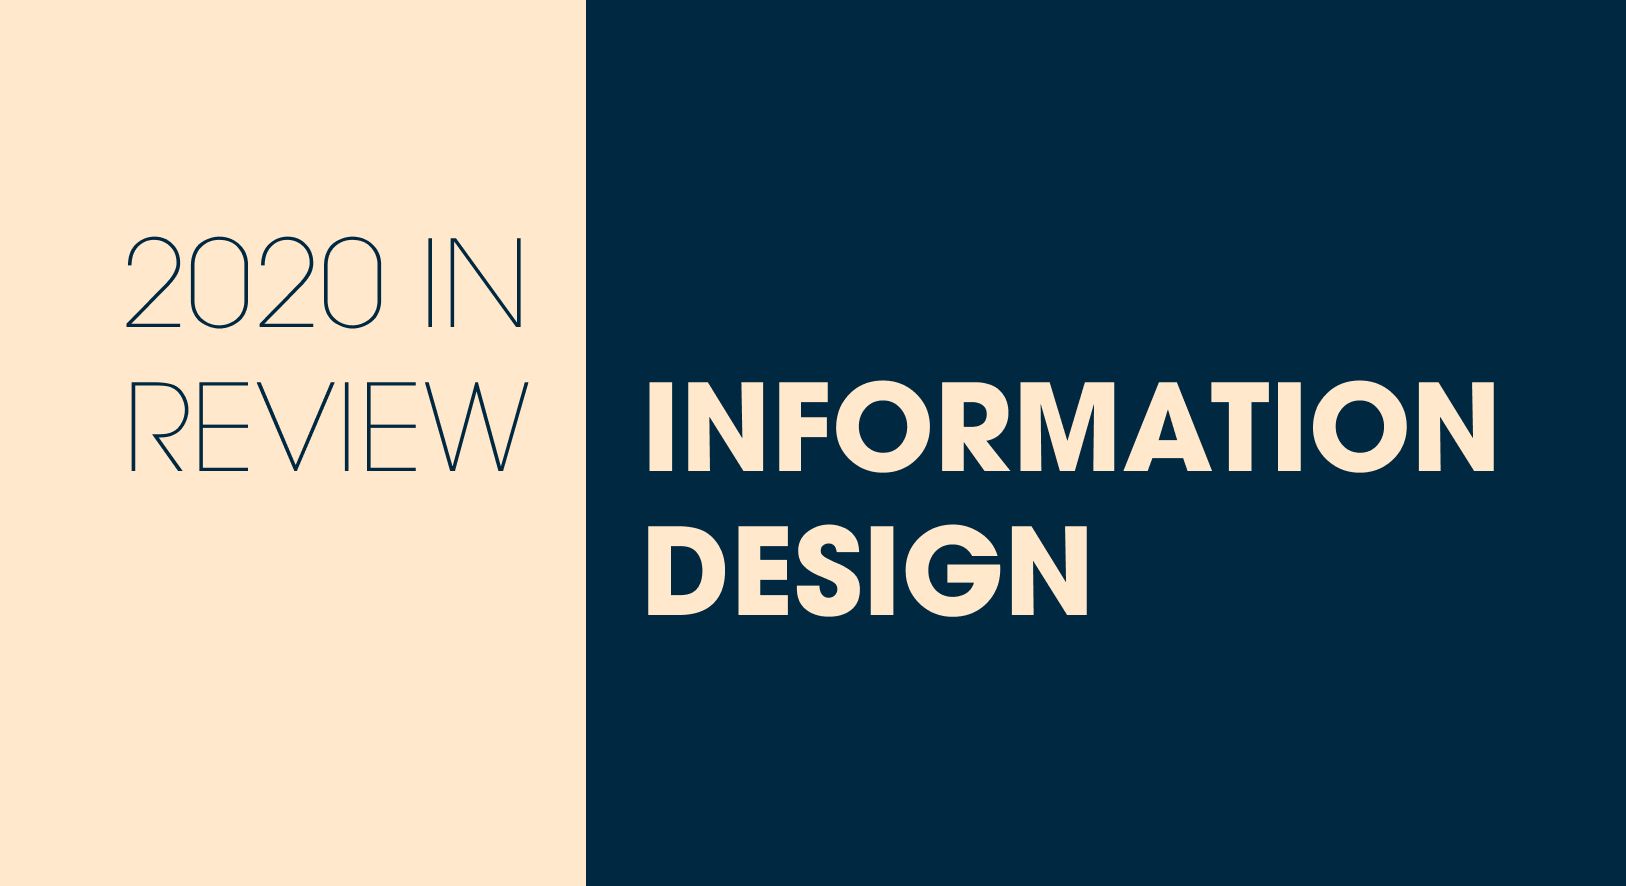 2020 in Review: Information Design